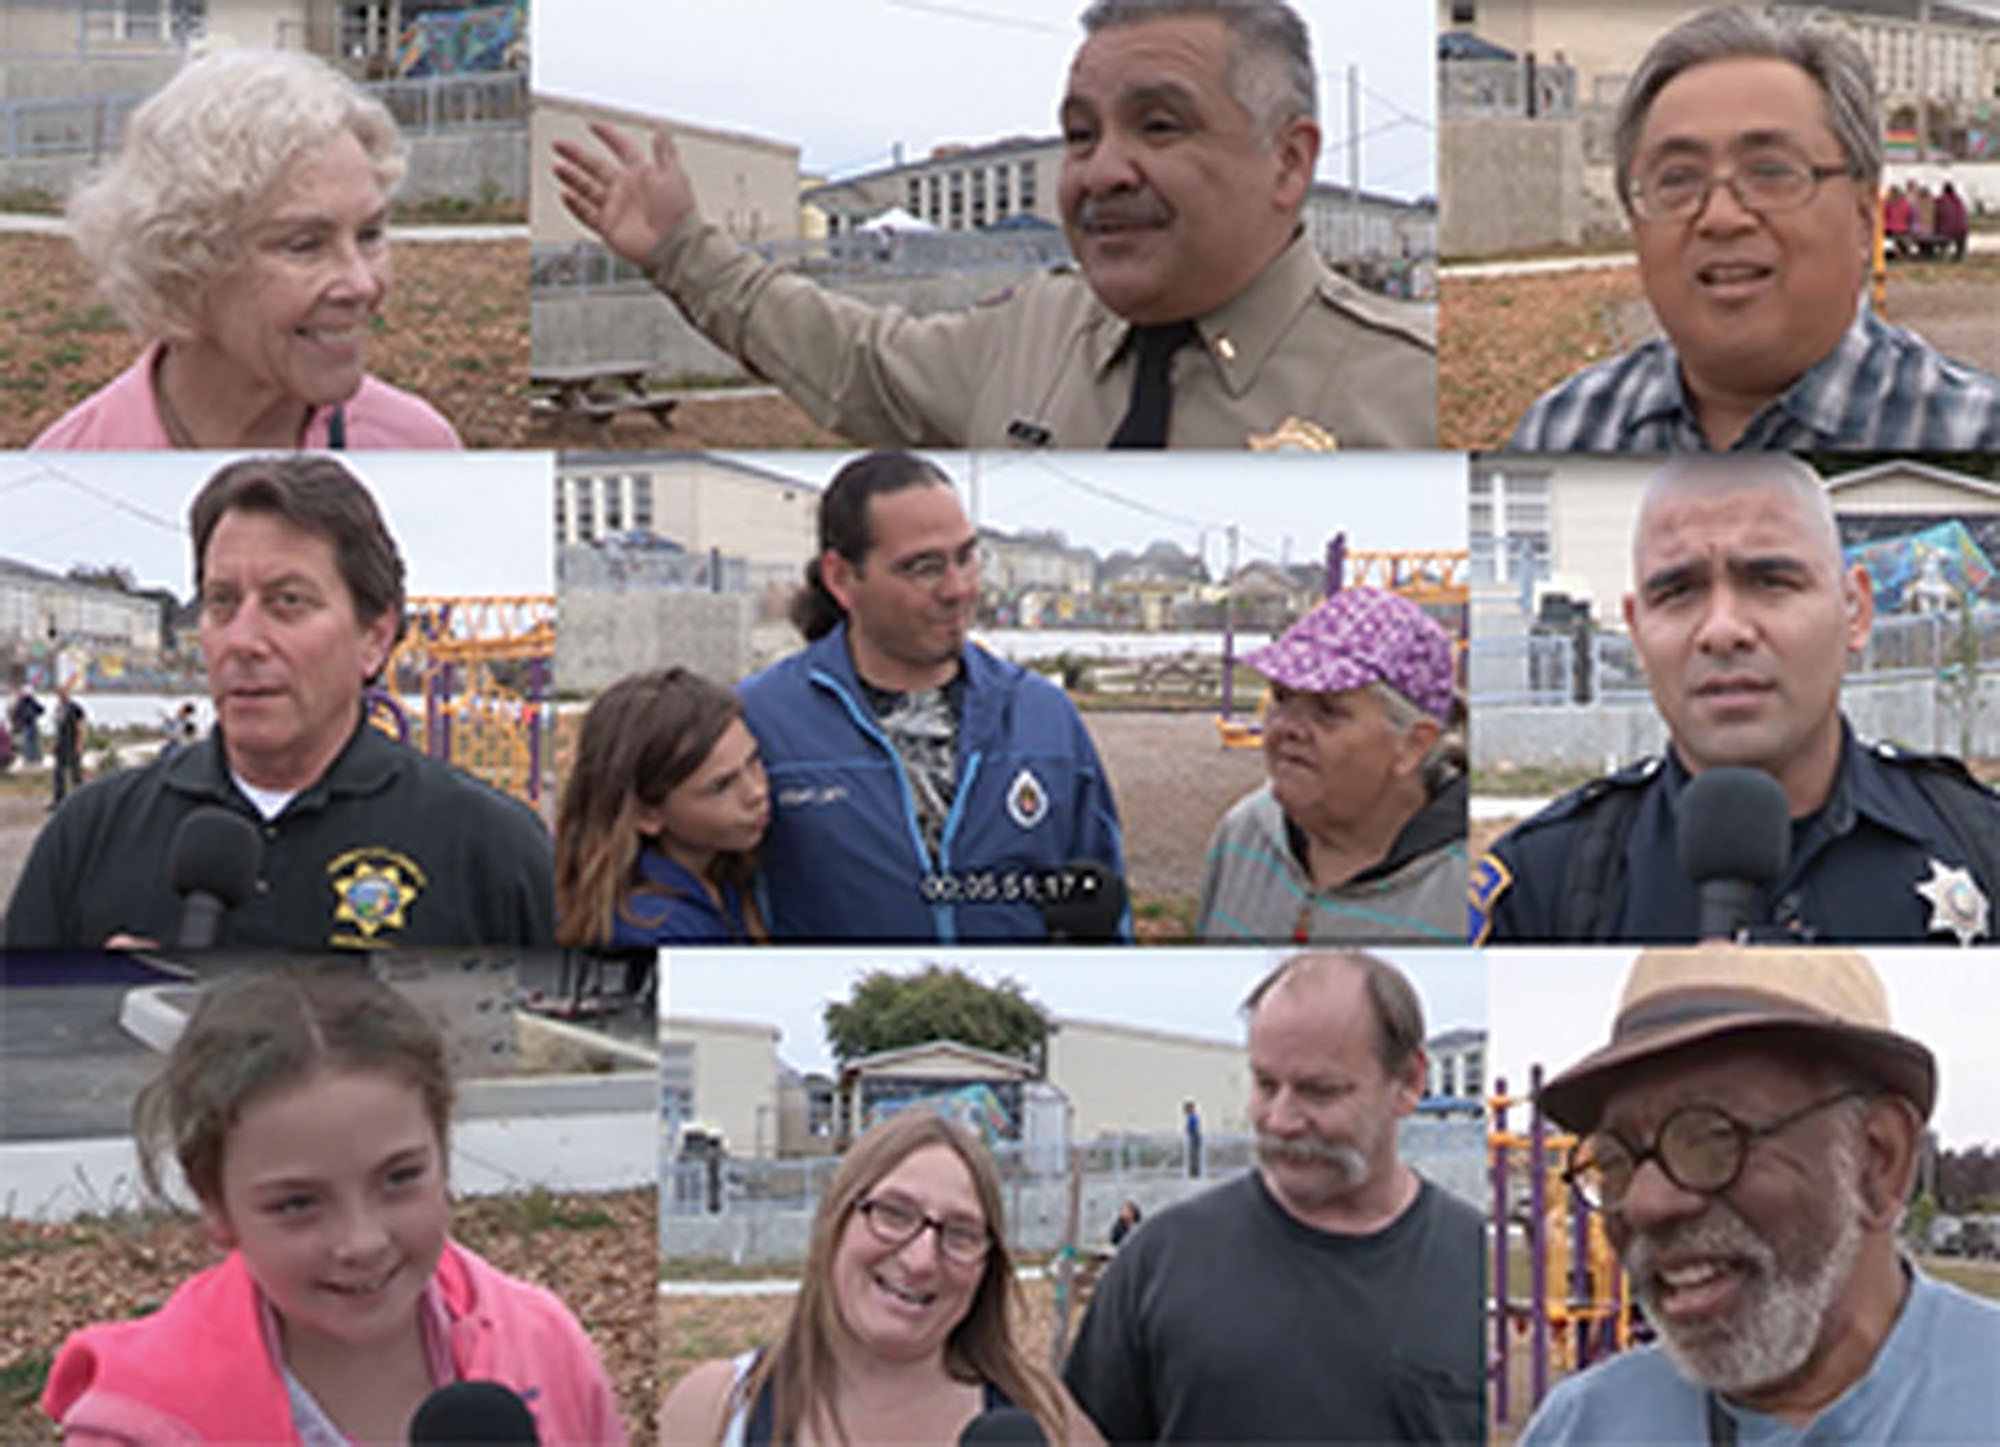 A collage of nine images of people from different ages and races outside speaking about parks